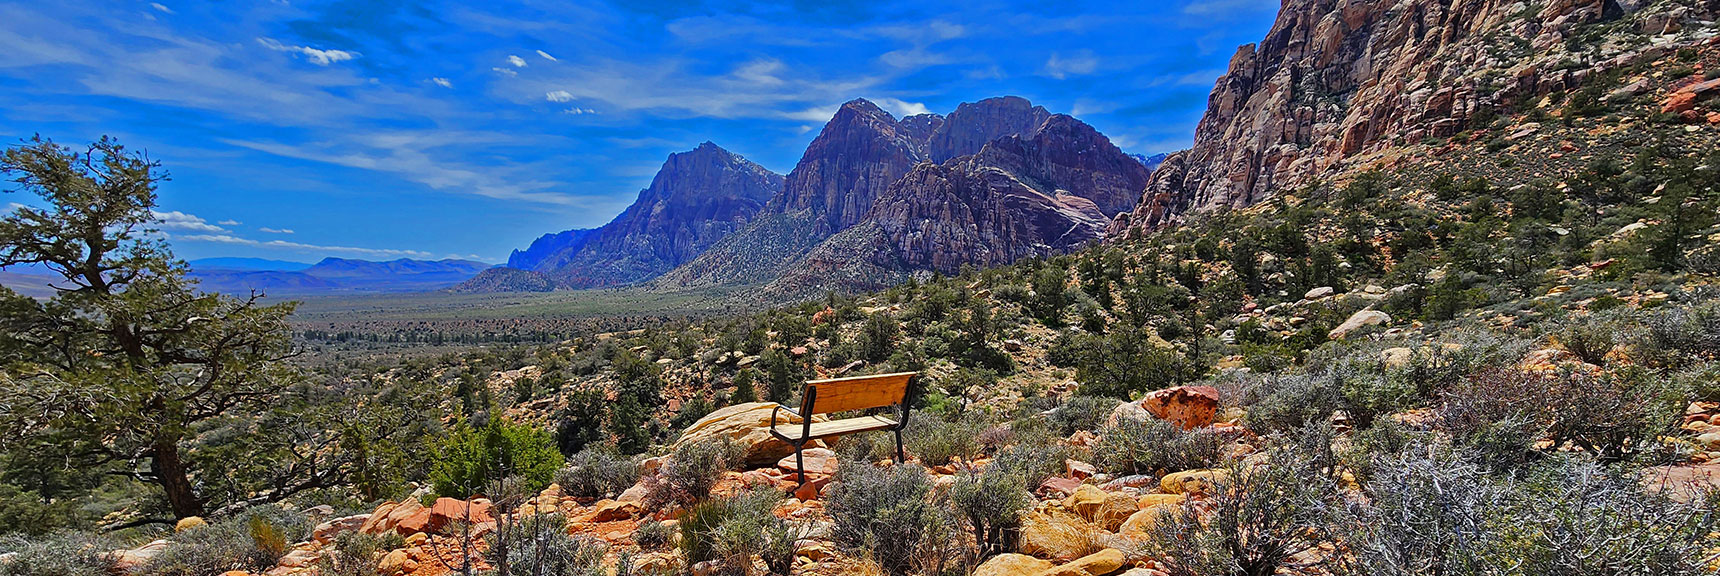 View Across Pine Creek Canyon to Juniper Peak, Rainbow Mountain and Mt. Wilson | Dales Trail | Red Rock Canyon National Conservation Area, Nevada | David Smith | LasVegasAreaTrails.com